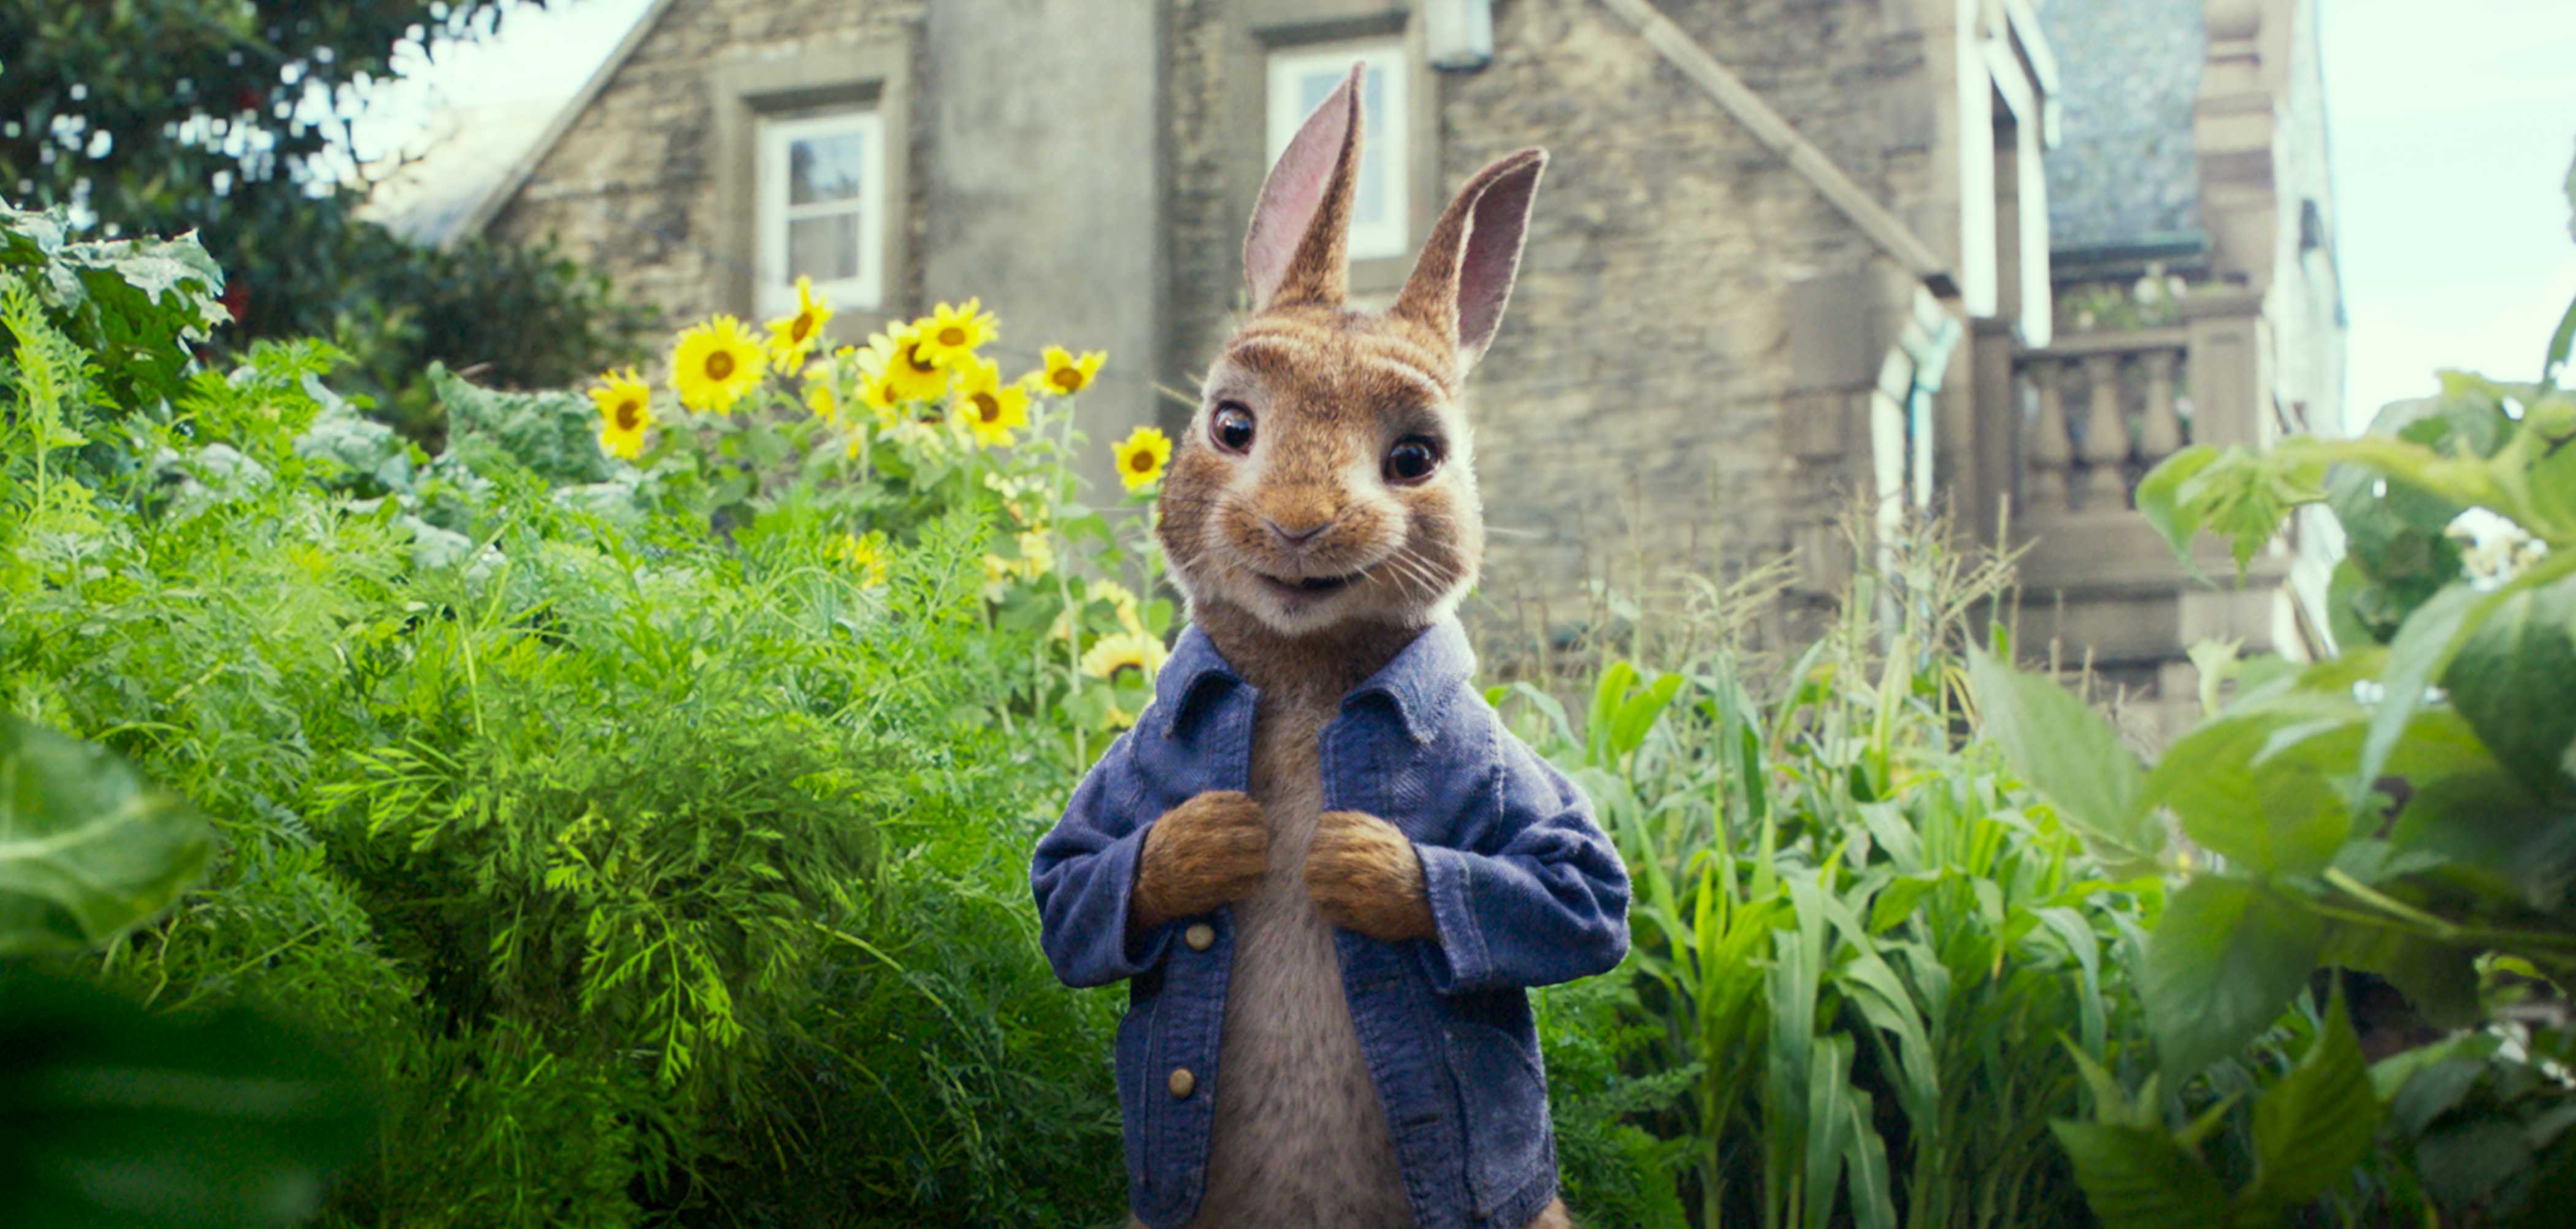 Parents are calling for a 'Peter Rabbit' boycott because of this offensive scene